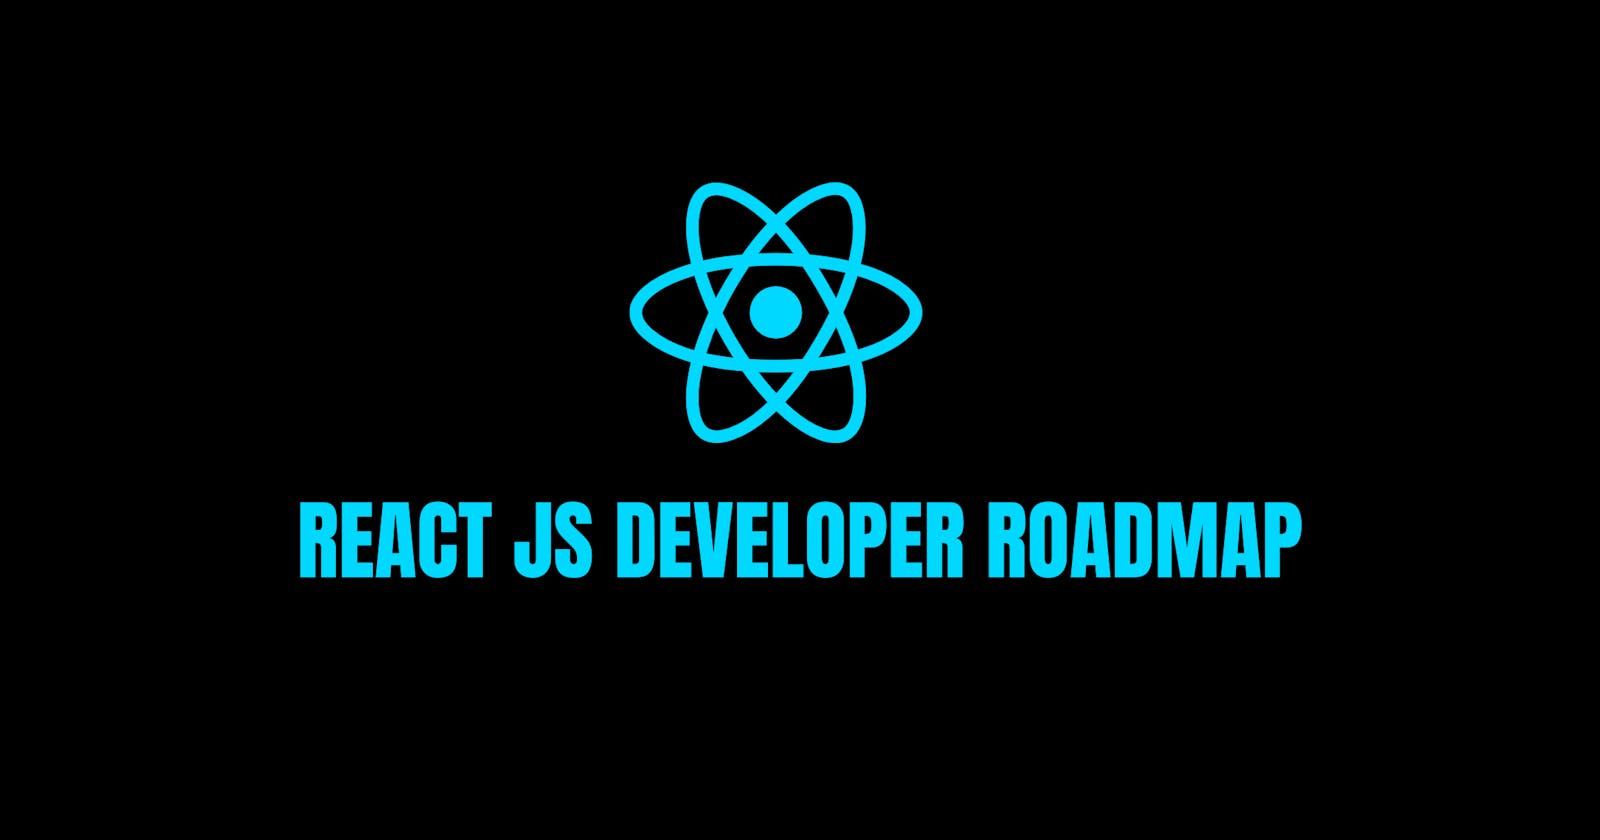 How to Become a React JS Developer? Complete Roadmap